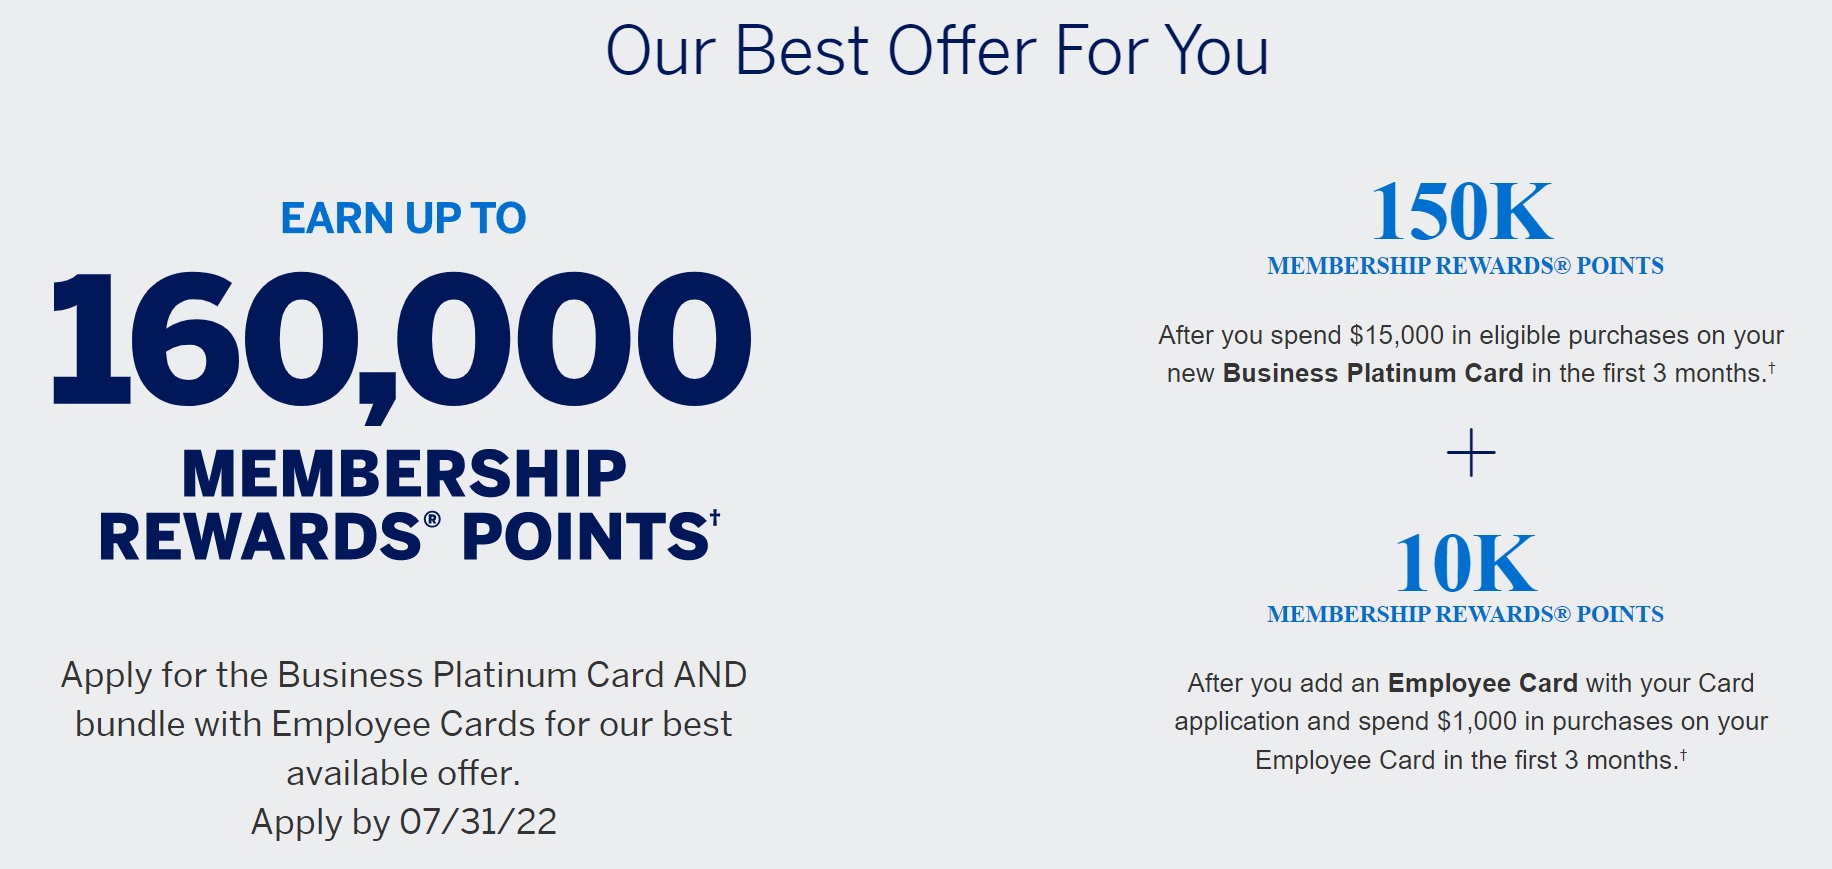 Amex Business Platinum/Business Gold: More massive offers (targeted)